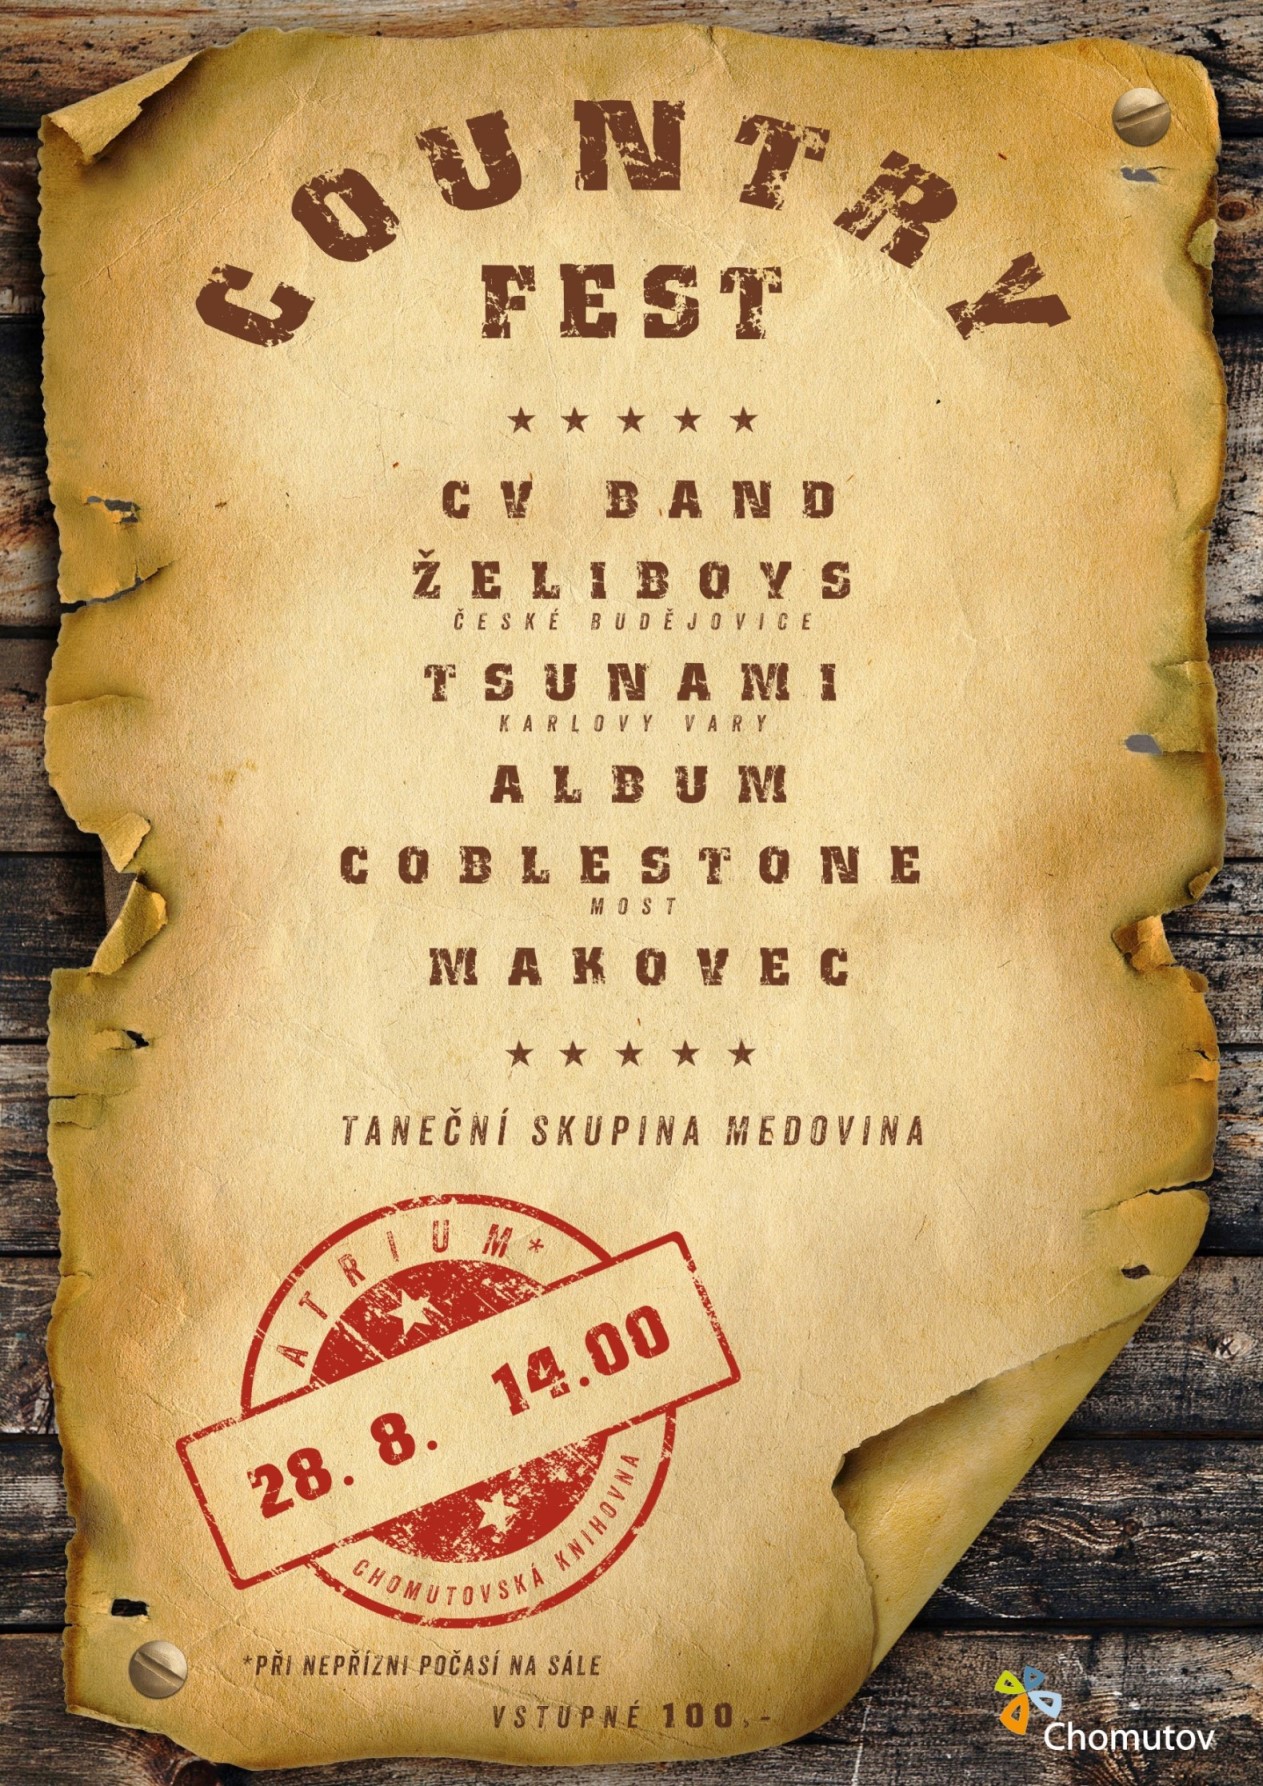 COUNTRY FEST 3 web